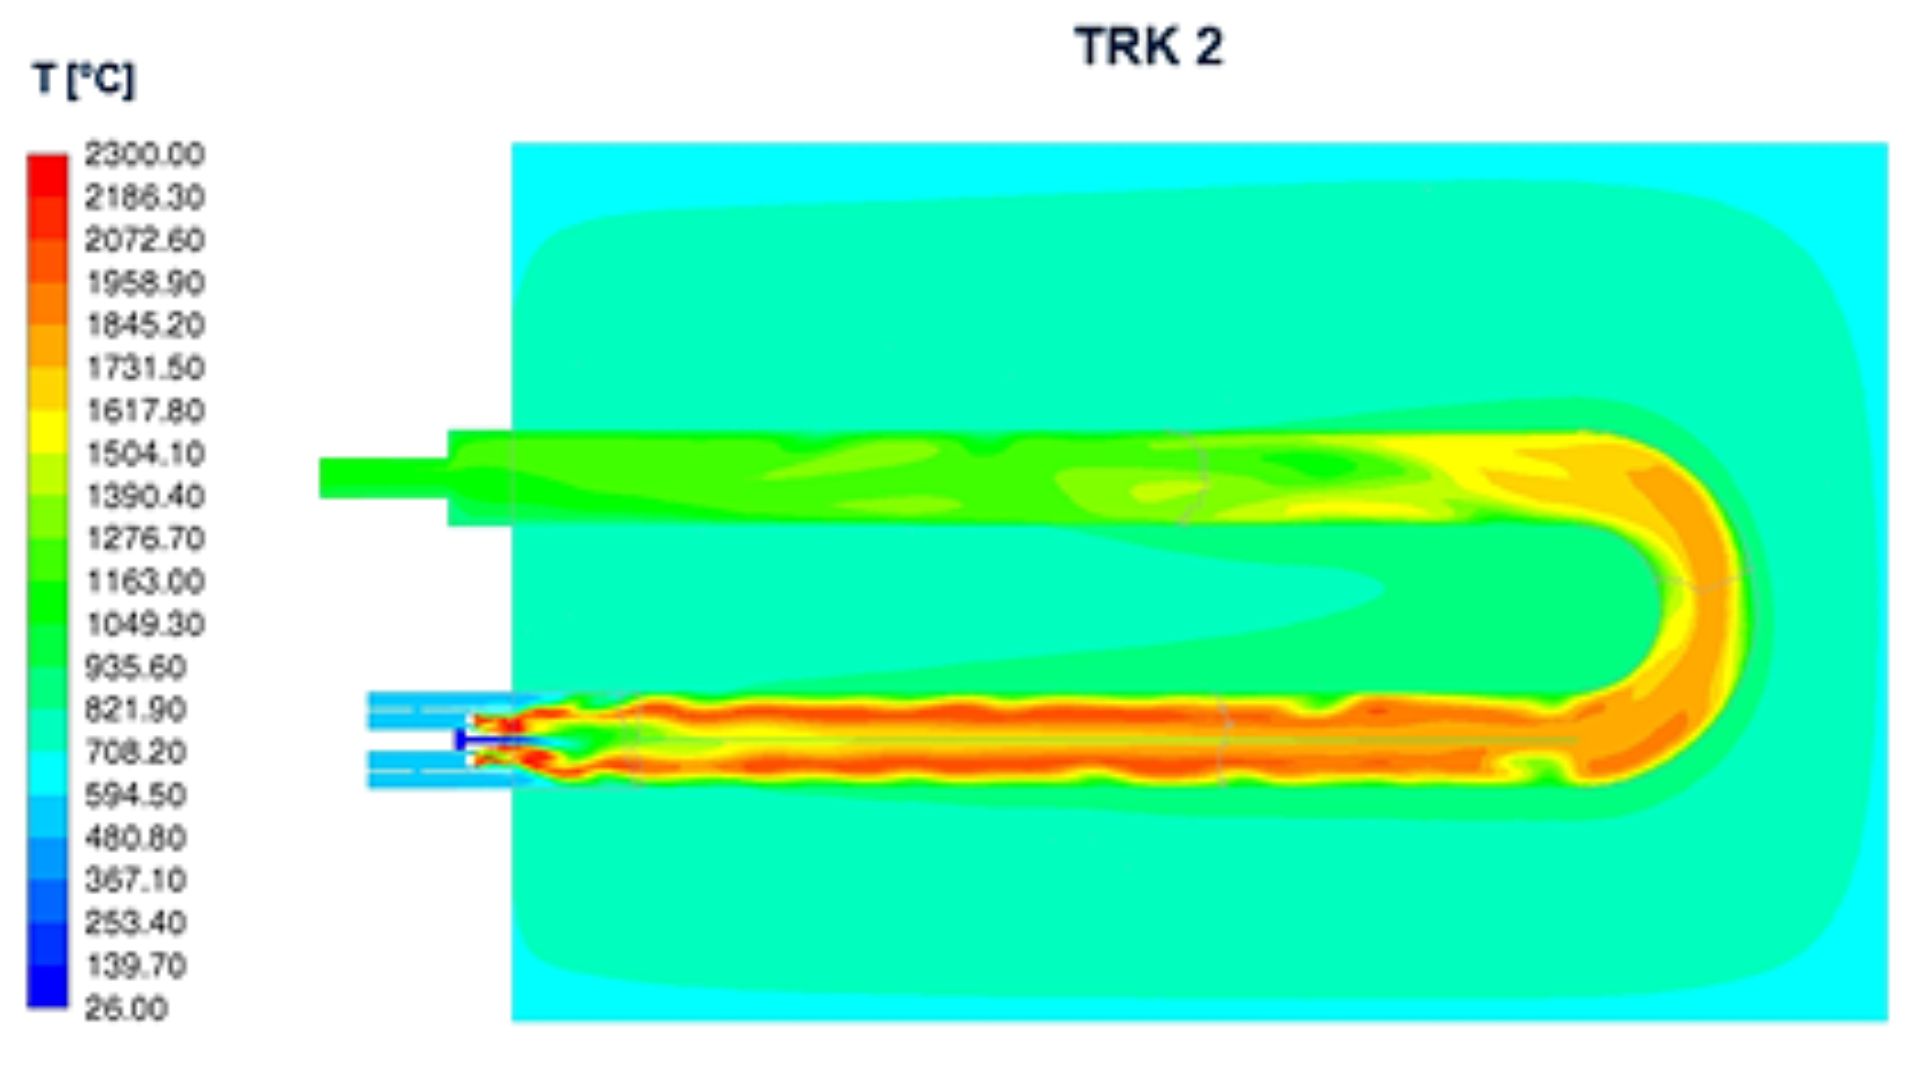 CFD simulation of a TRK burner in a U-shaped radiant tube showing the development of the temperature field.